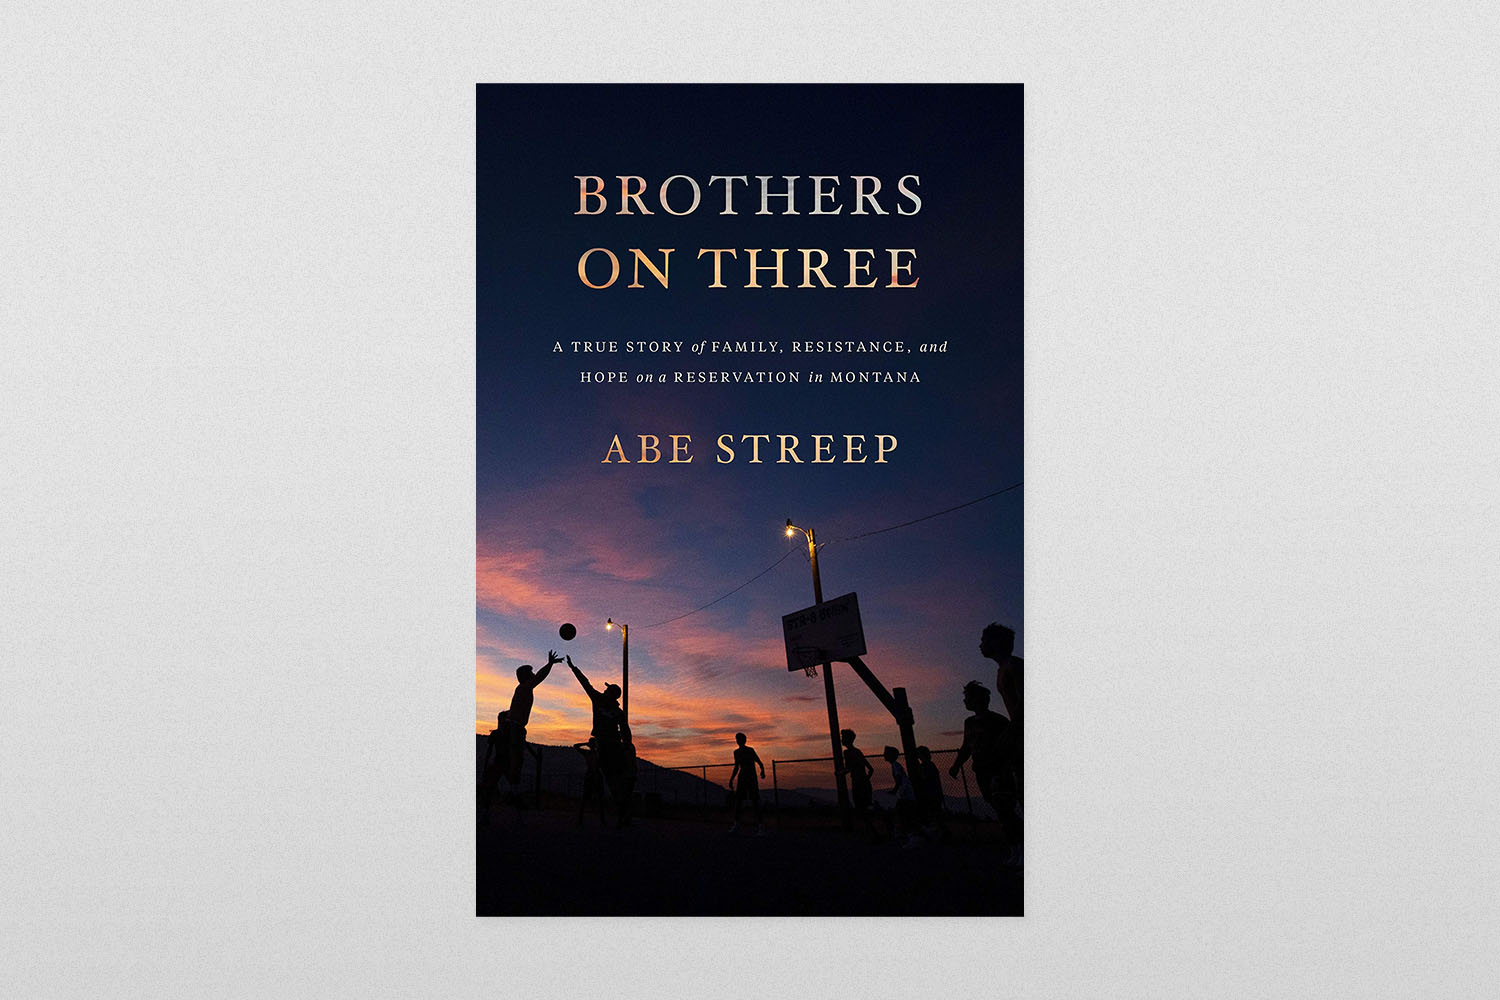 "Brothers on Three: A True Story of Family, Resistance, and Hope on a Reservation in Montana"